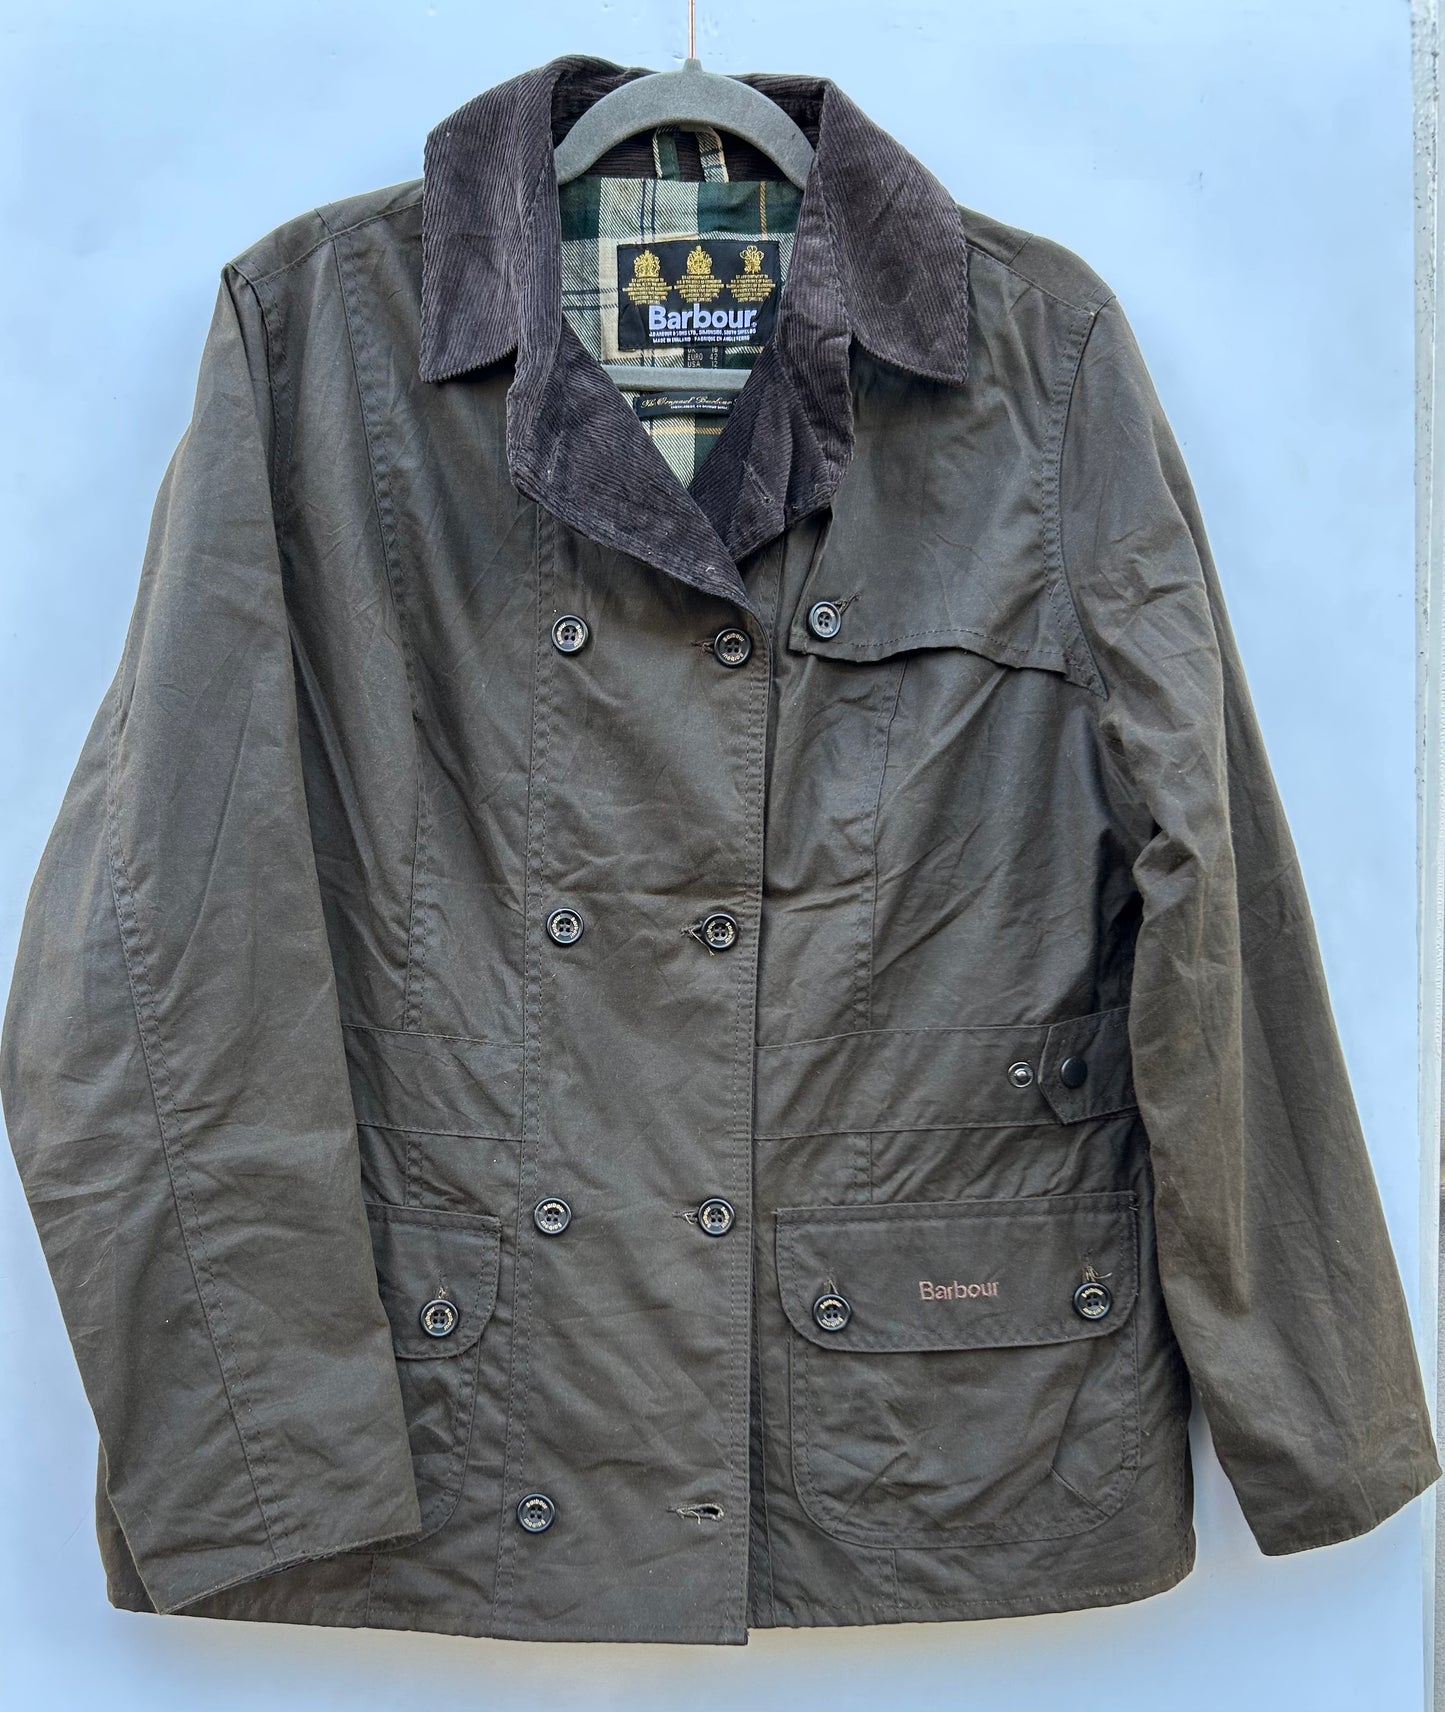 Giacca Barbour doppio petto unisex verde Uk16 tg.46 - Green double breasted Jacket uk16